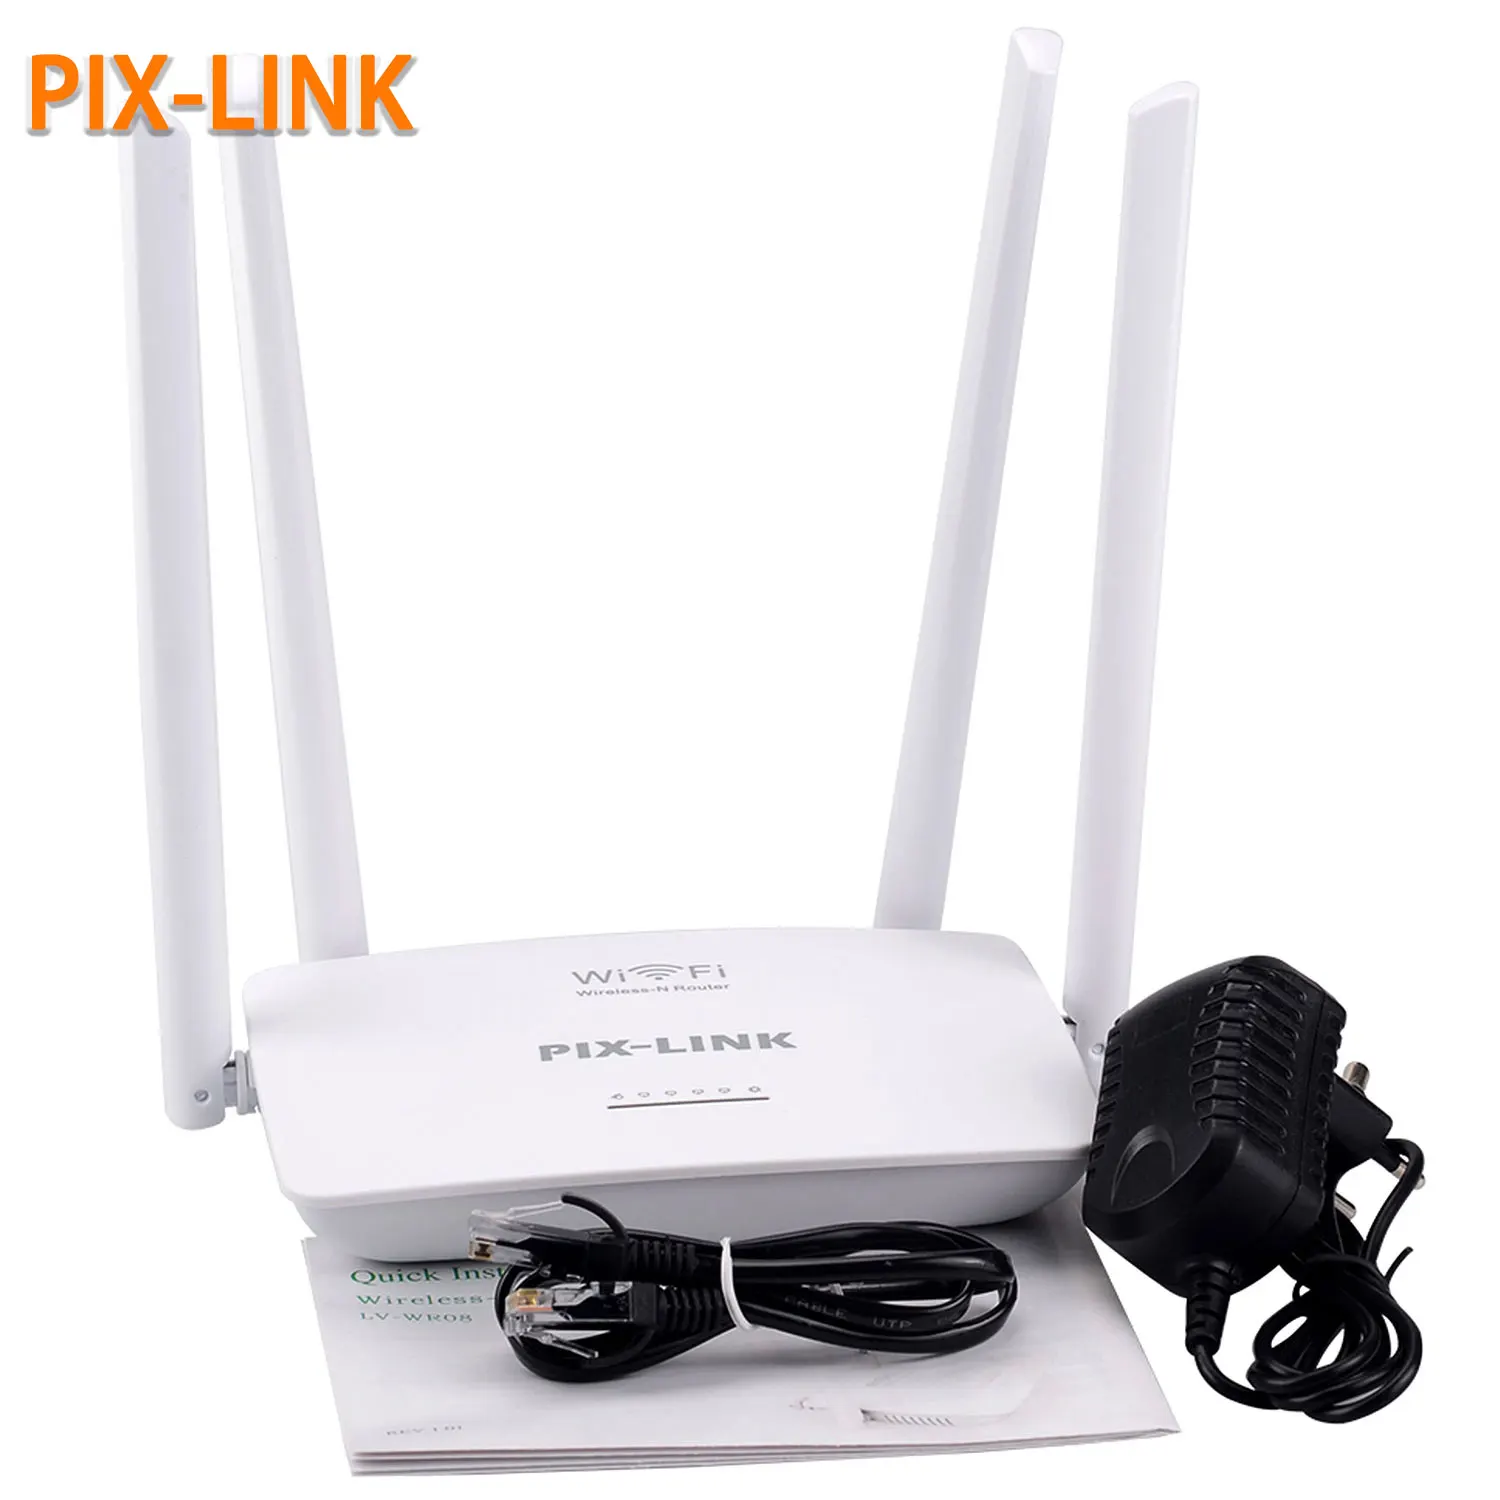 

Antenna-Signal-Booster Repeater-Extender Expander Network Wifi-Router Setup AP Mini 300mbps